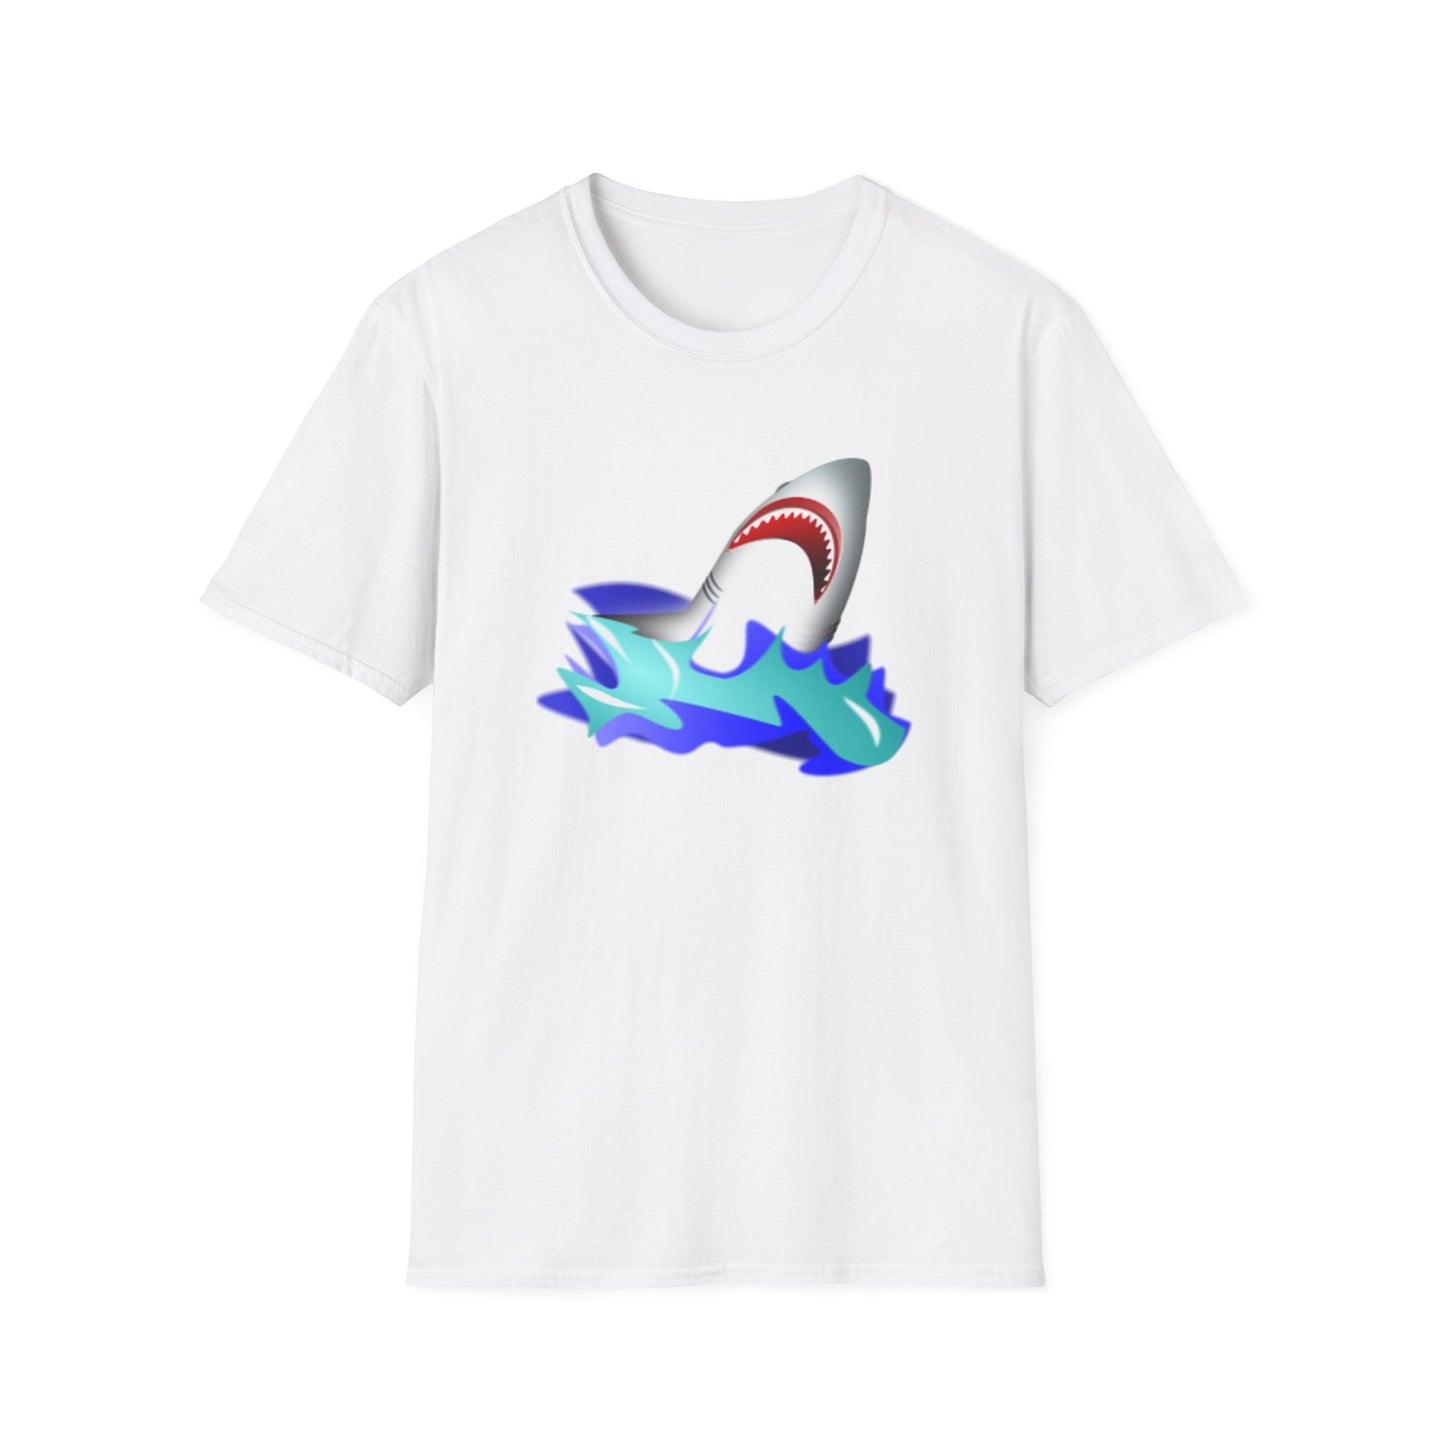 A white t-shirt with a design of a shark rising up from the sea water.